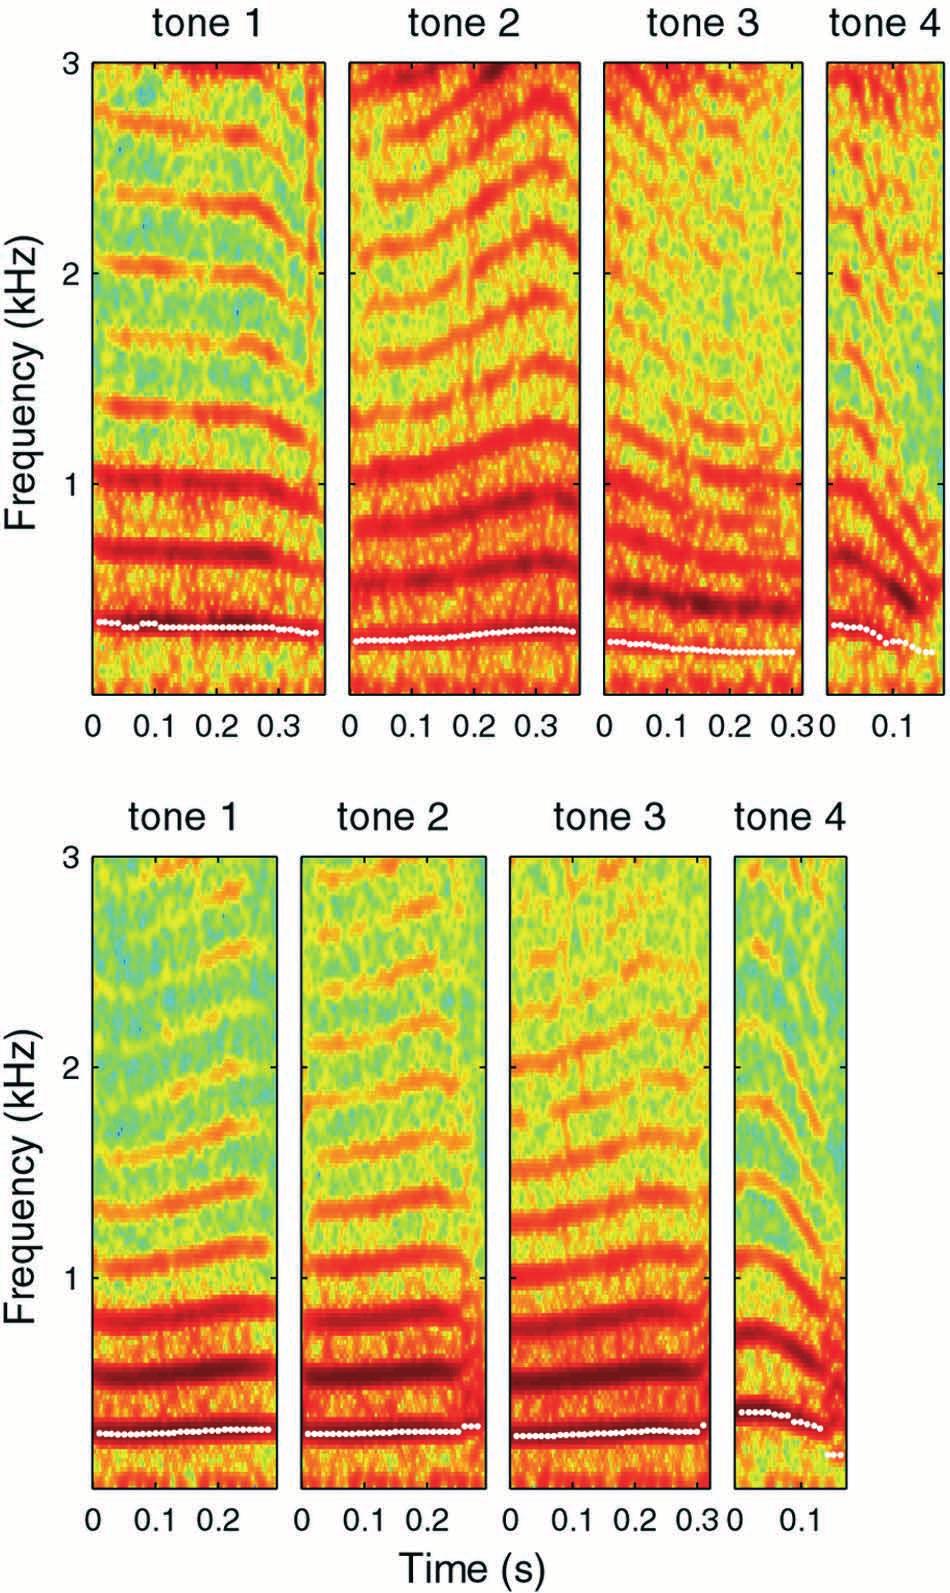 Acta Otolaryngol 124 Tone production by CI children 365 Fig. 1. Spectrograms of speech recordings from a normalhearing child (N7; upper panels) and a child with a CI (S3; lower panels).